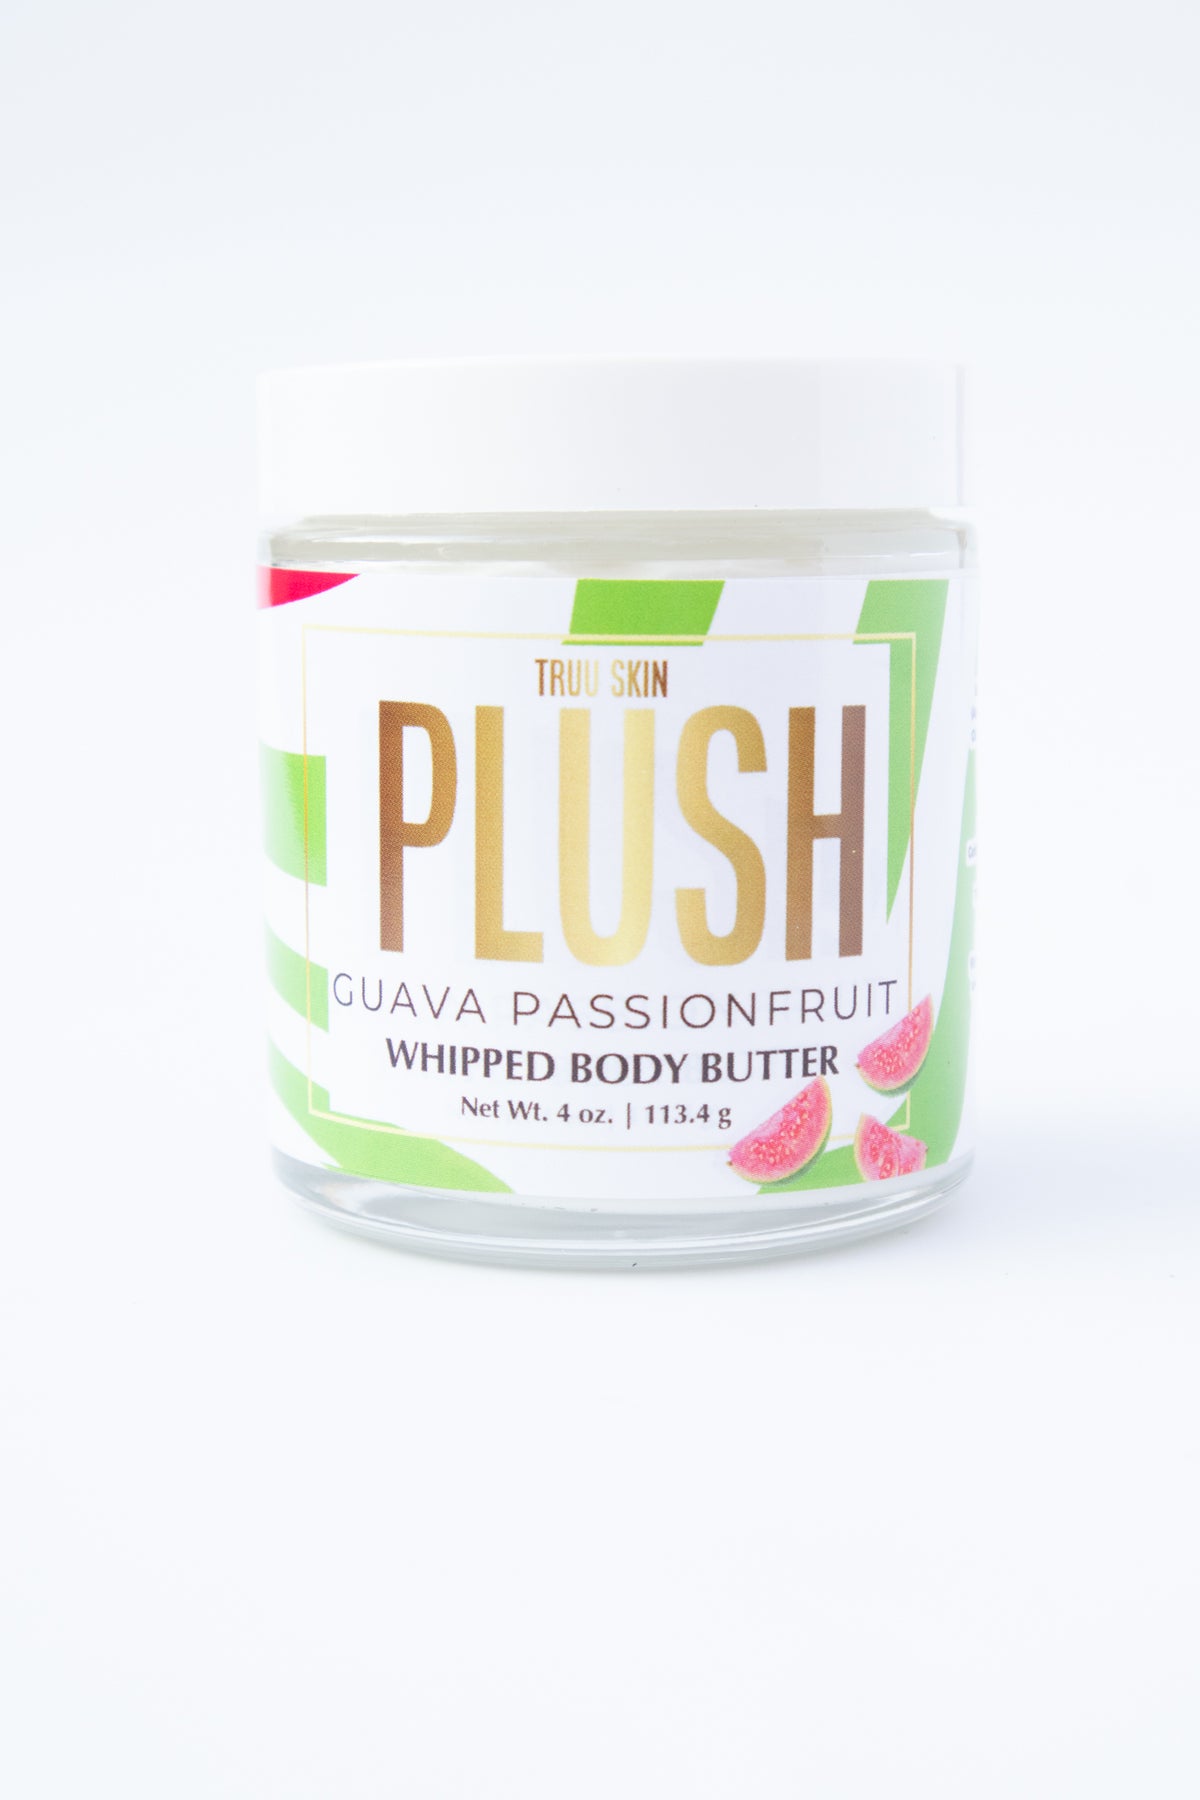 NEW! PLUSH Guava Passionfruit Whipped Body Butter